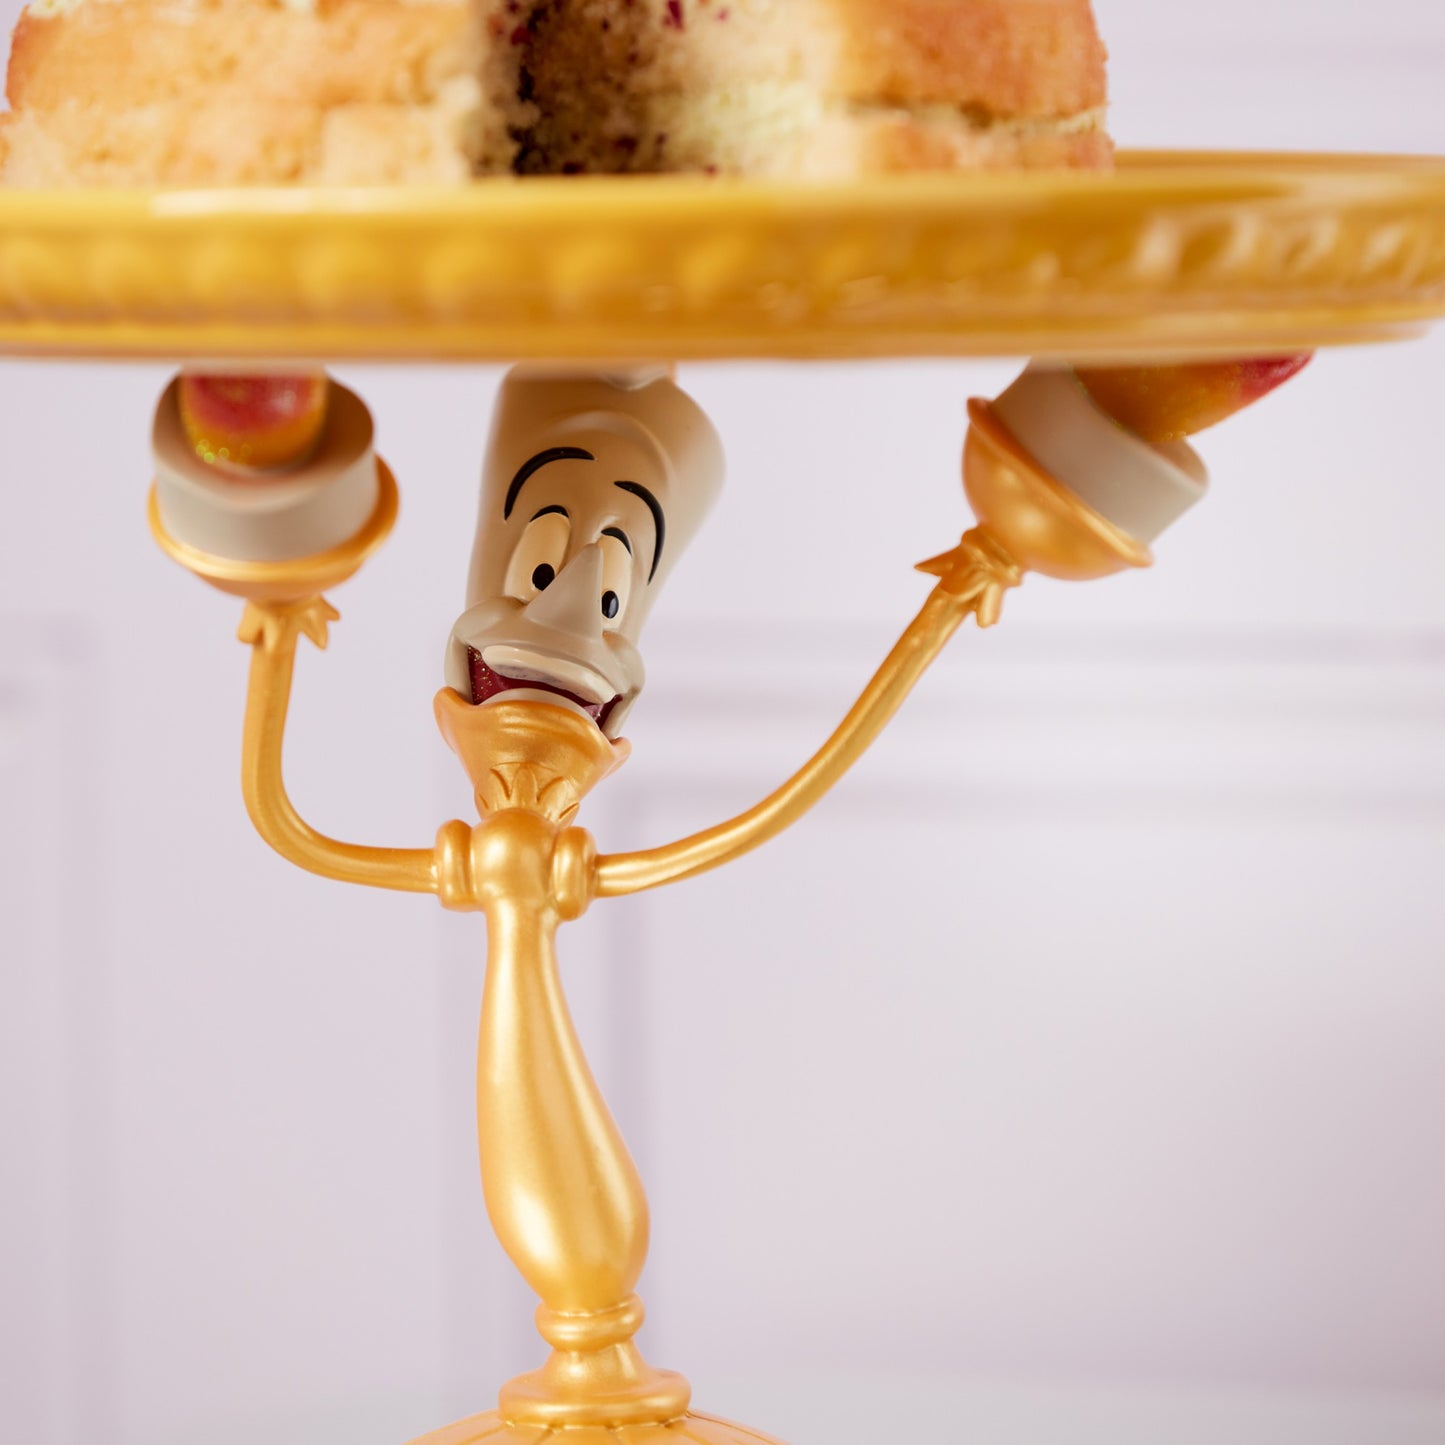 Disney Store Lumiere Cake Stand, Beauty and the Beast